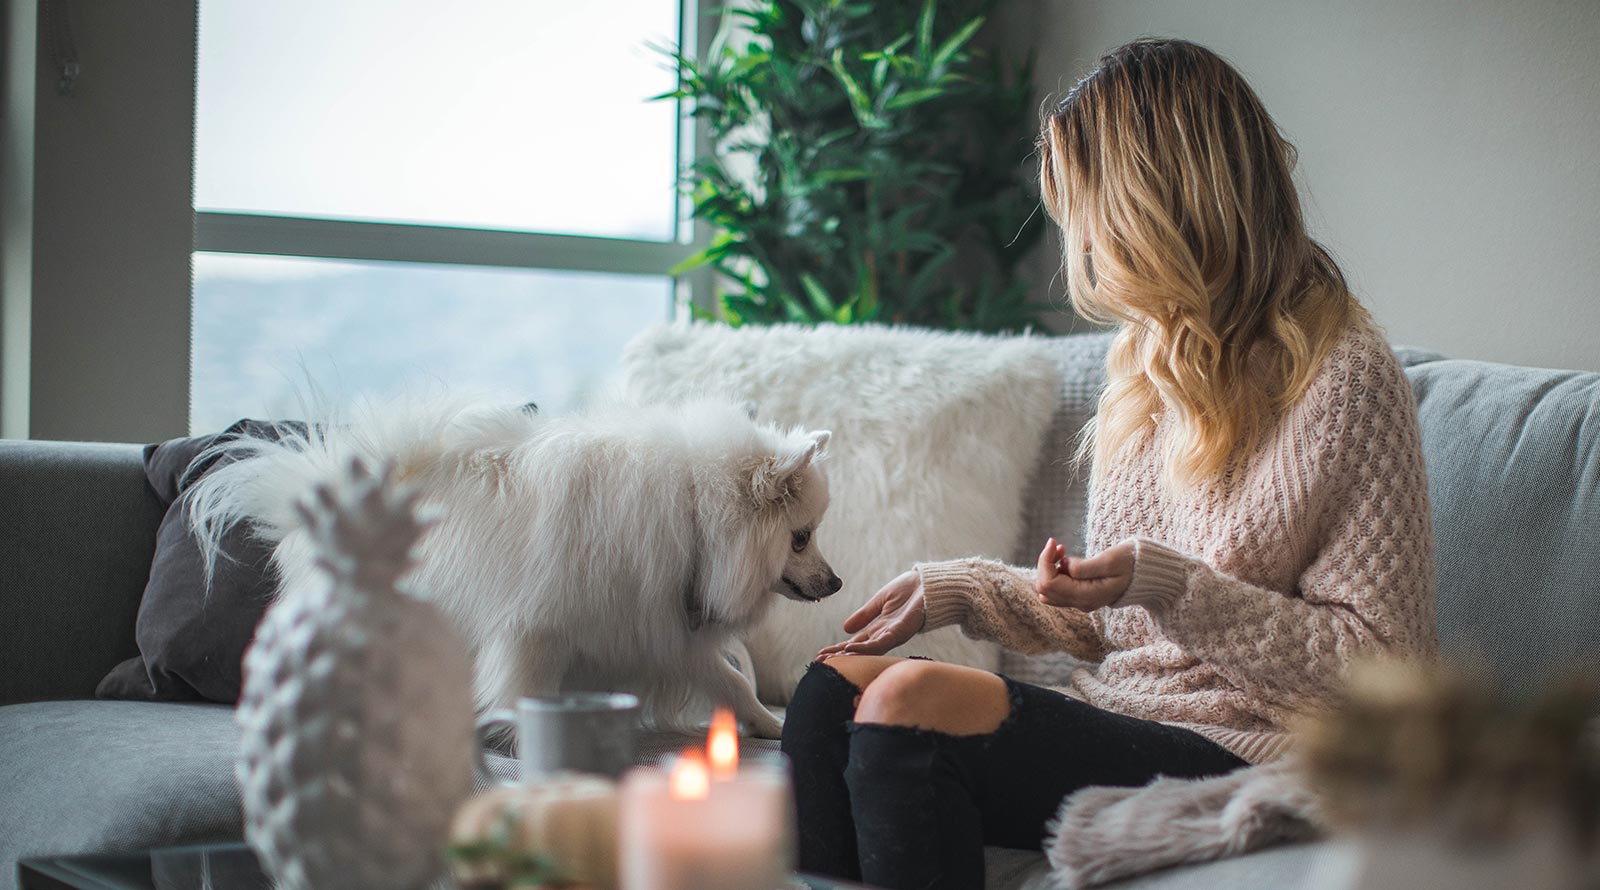 Woman and dog in living room